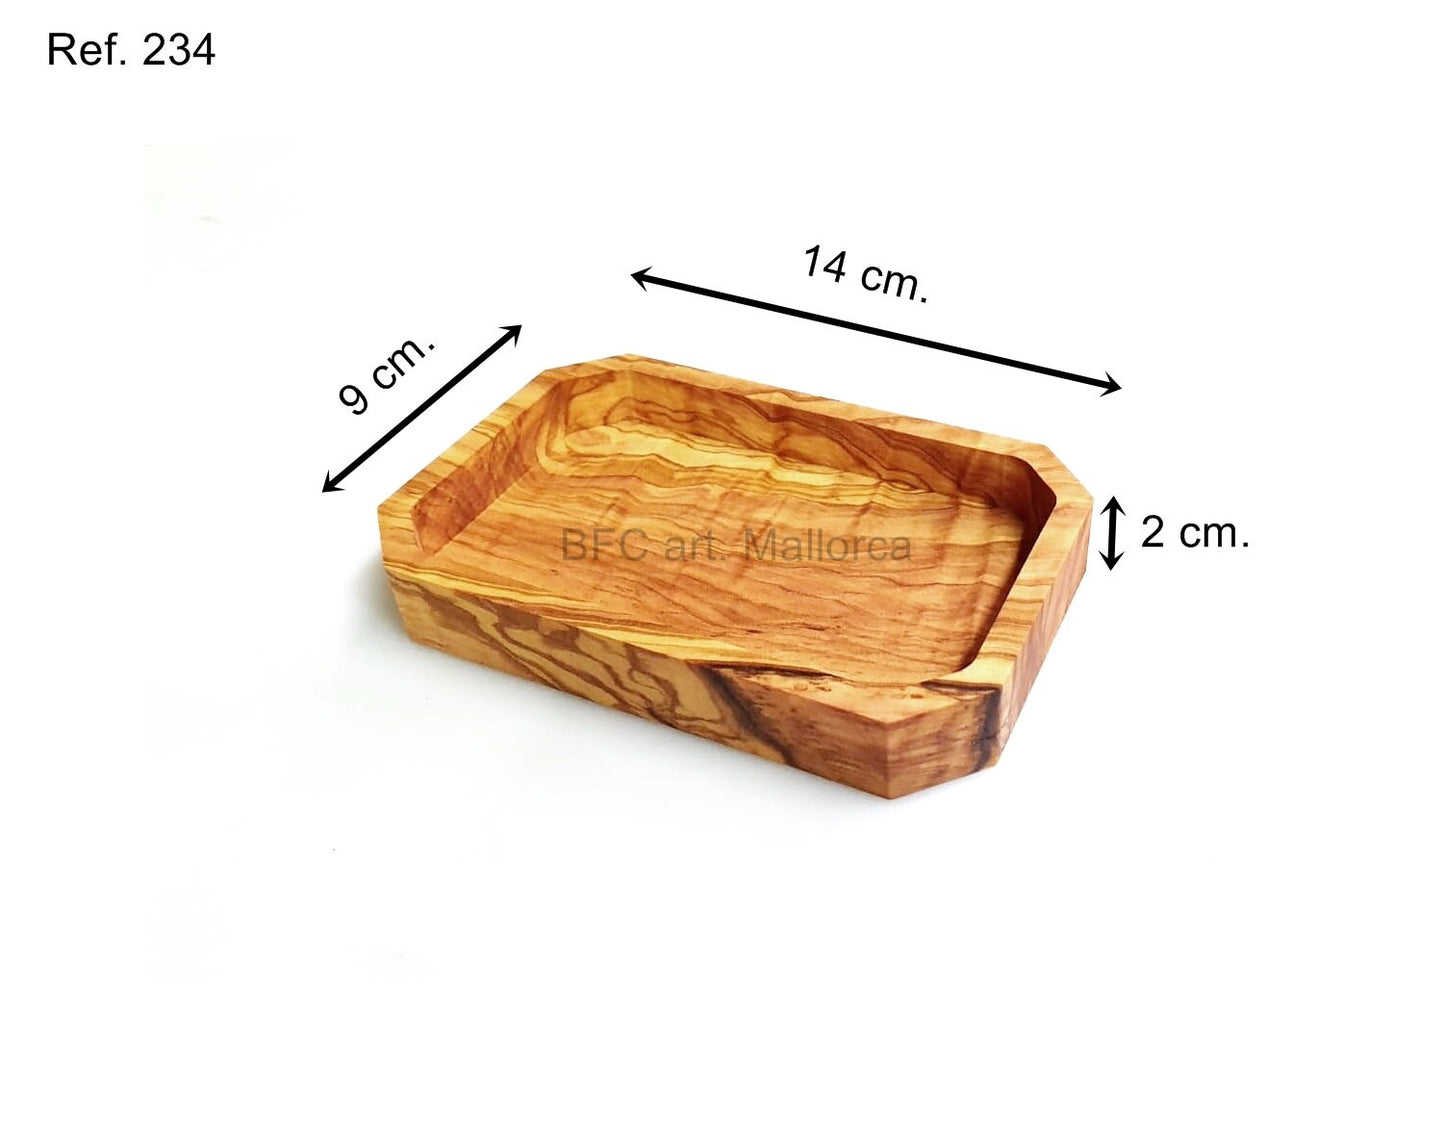 Appetizer Tray, Snack Tray, Wooden Cheese Tray, Olive Wood Tray, Wooden Tray, Square Tray, Small Wooden Tray, Wooden Food Tray Snack Tray